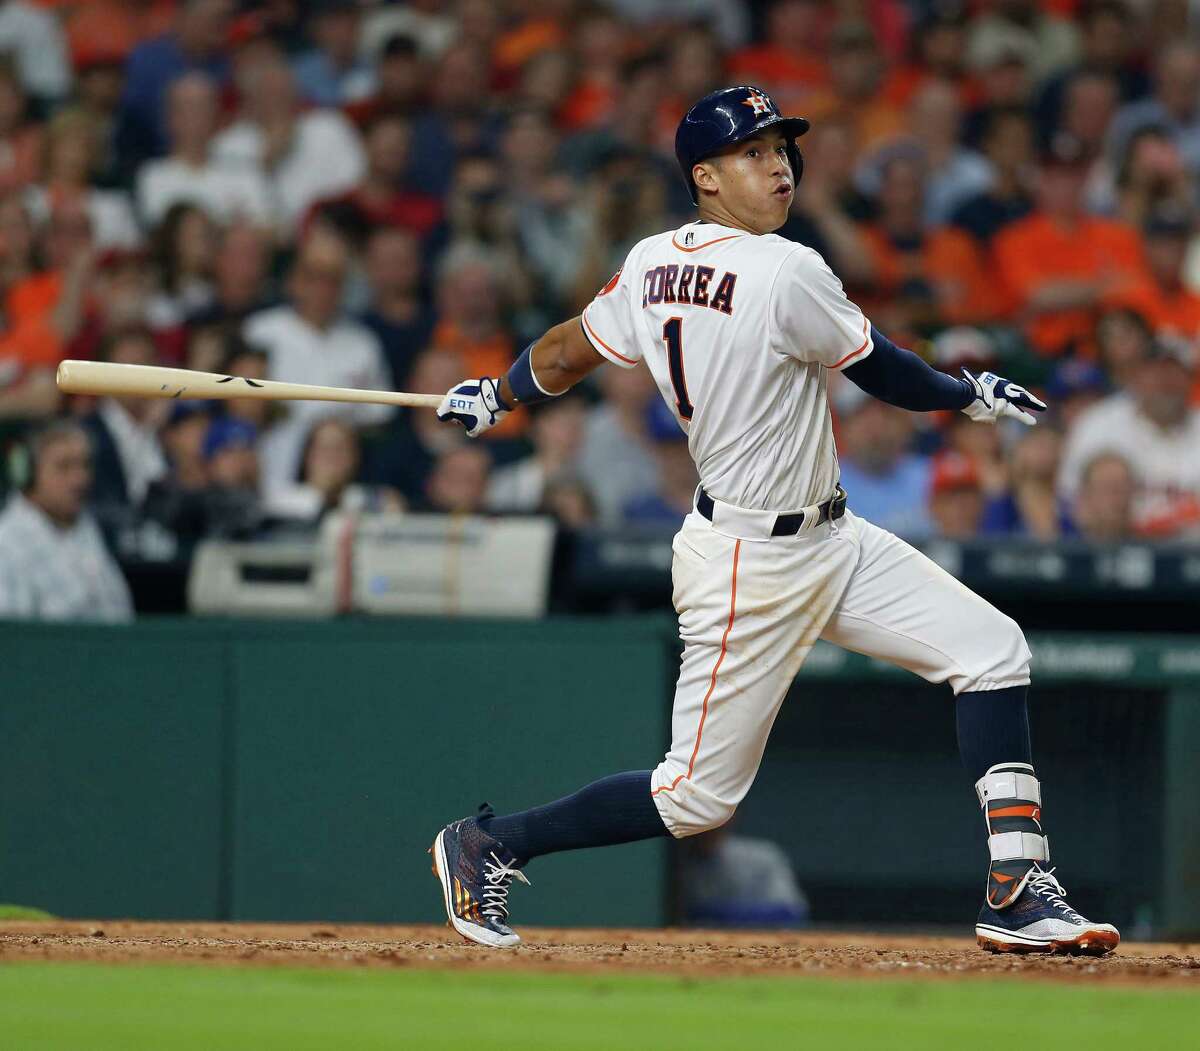 As future of franchise, Astros' Correa learns why fame can be fleeting